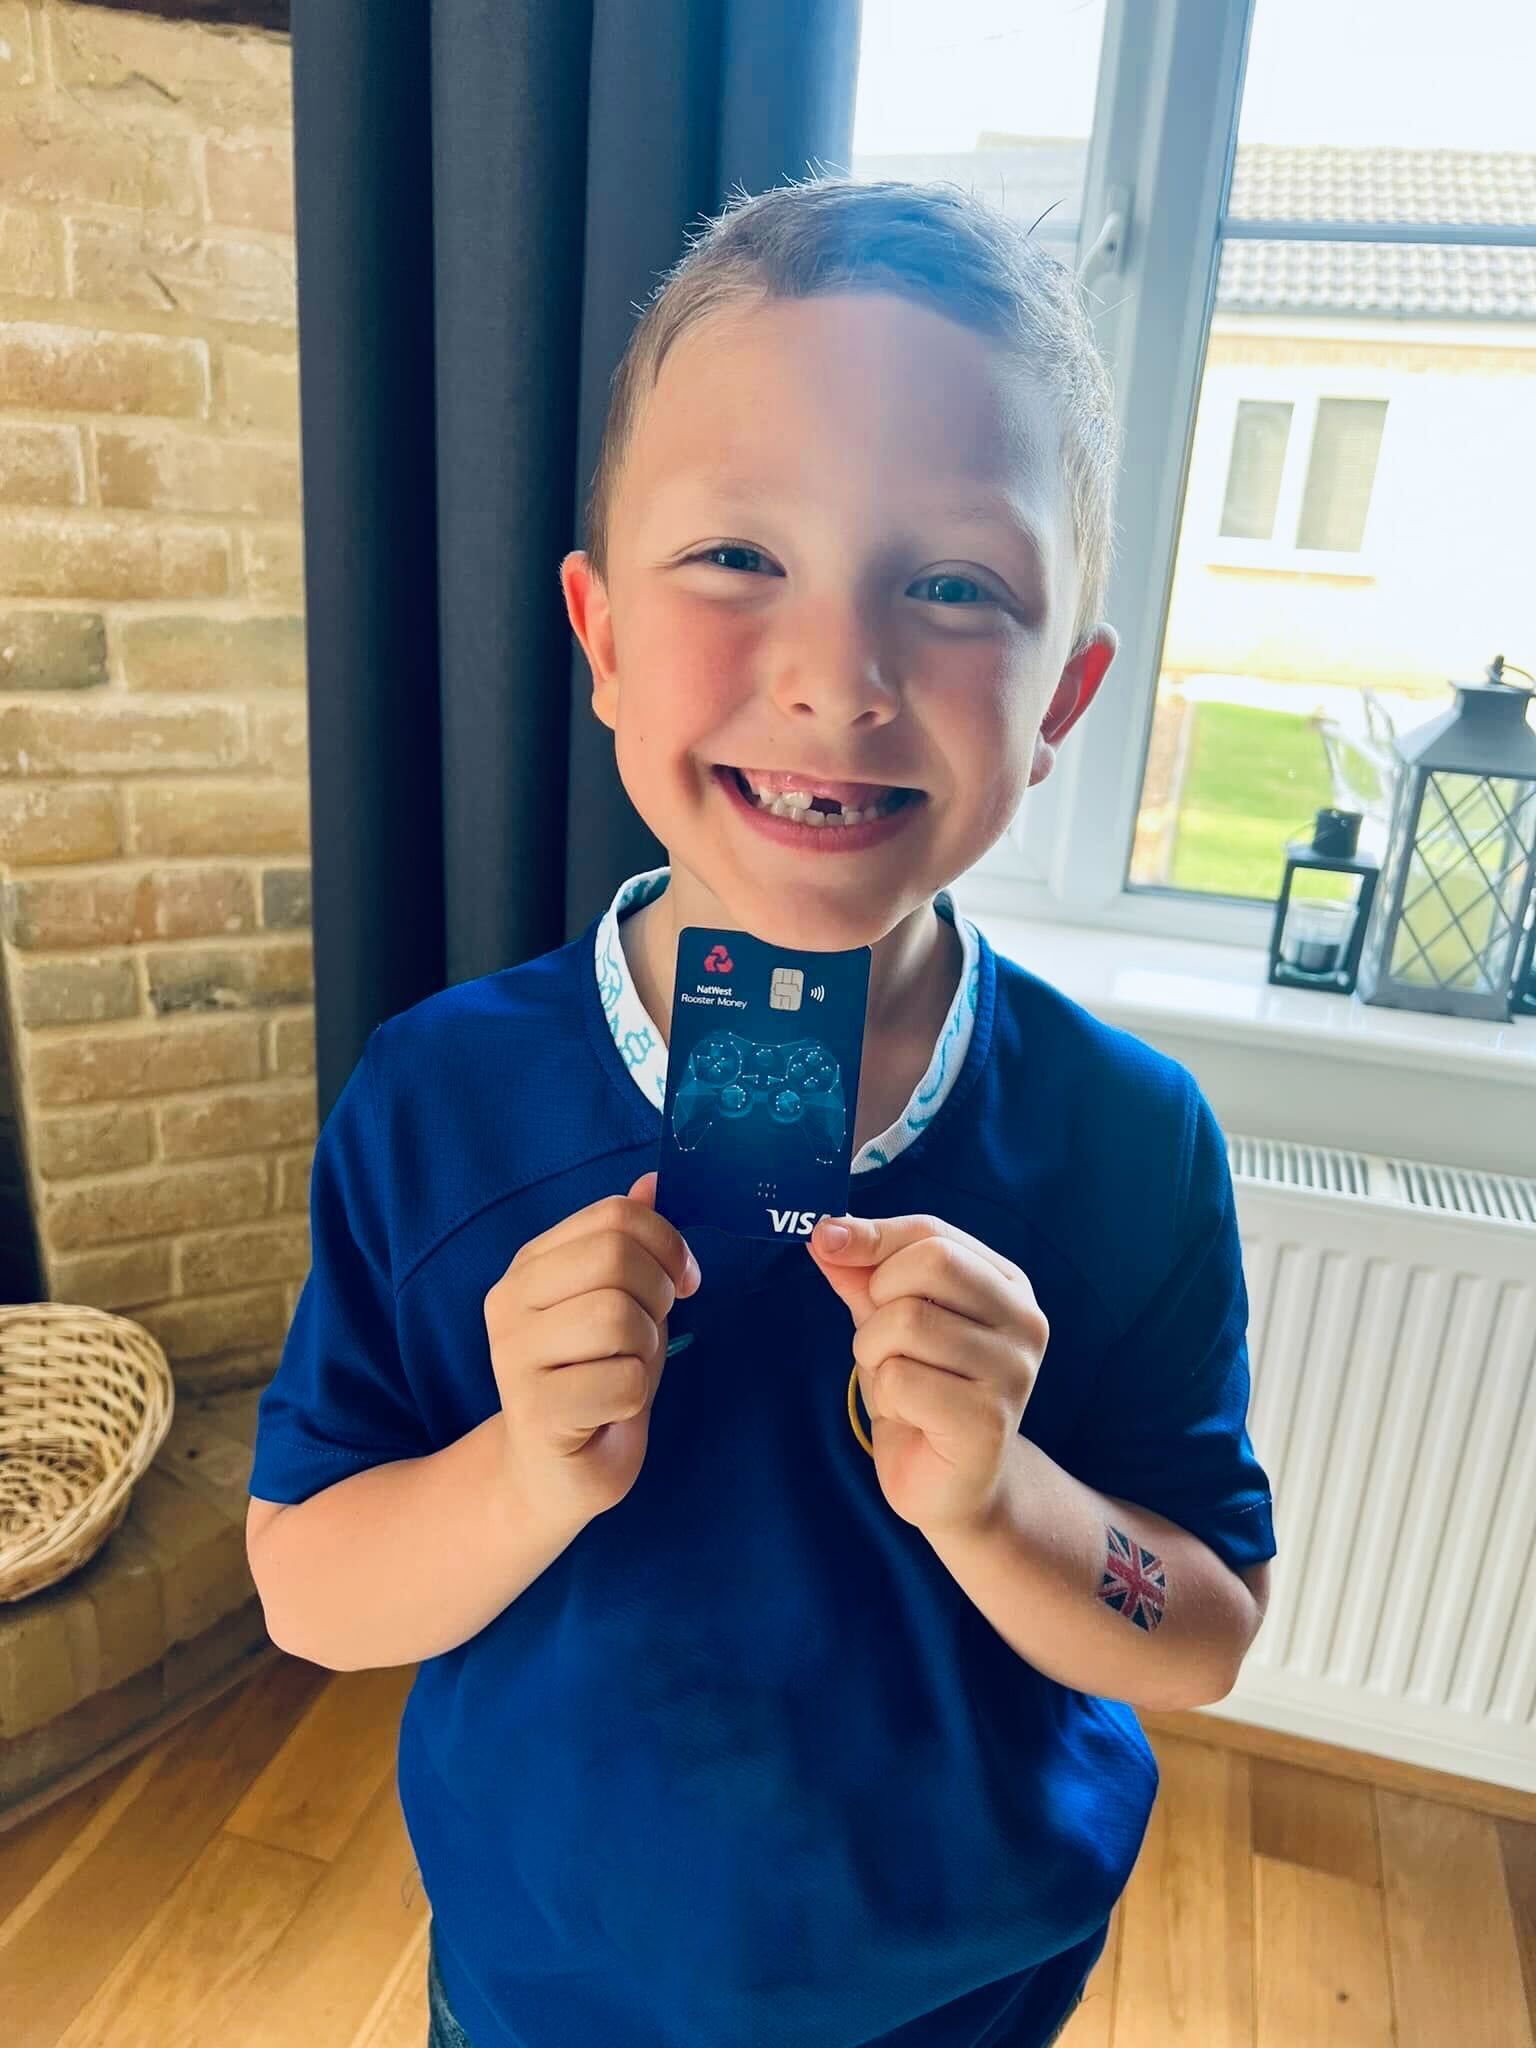 A young boy in a football top is smiling and holding up a rooster money card